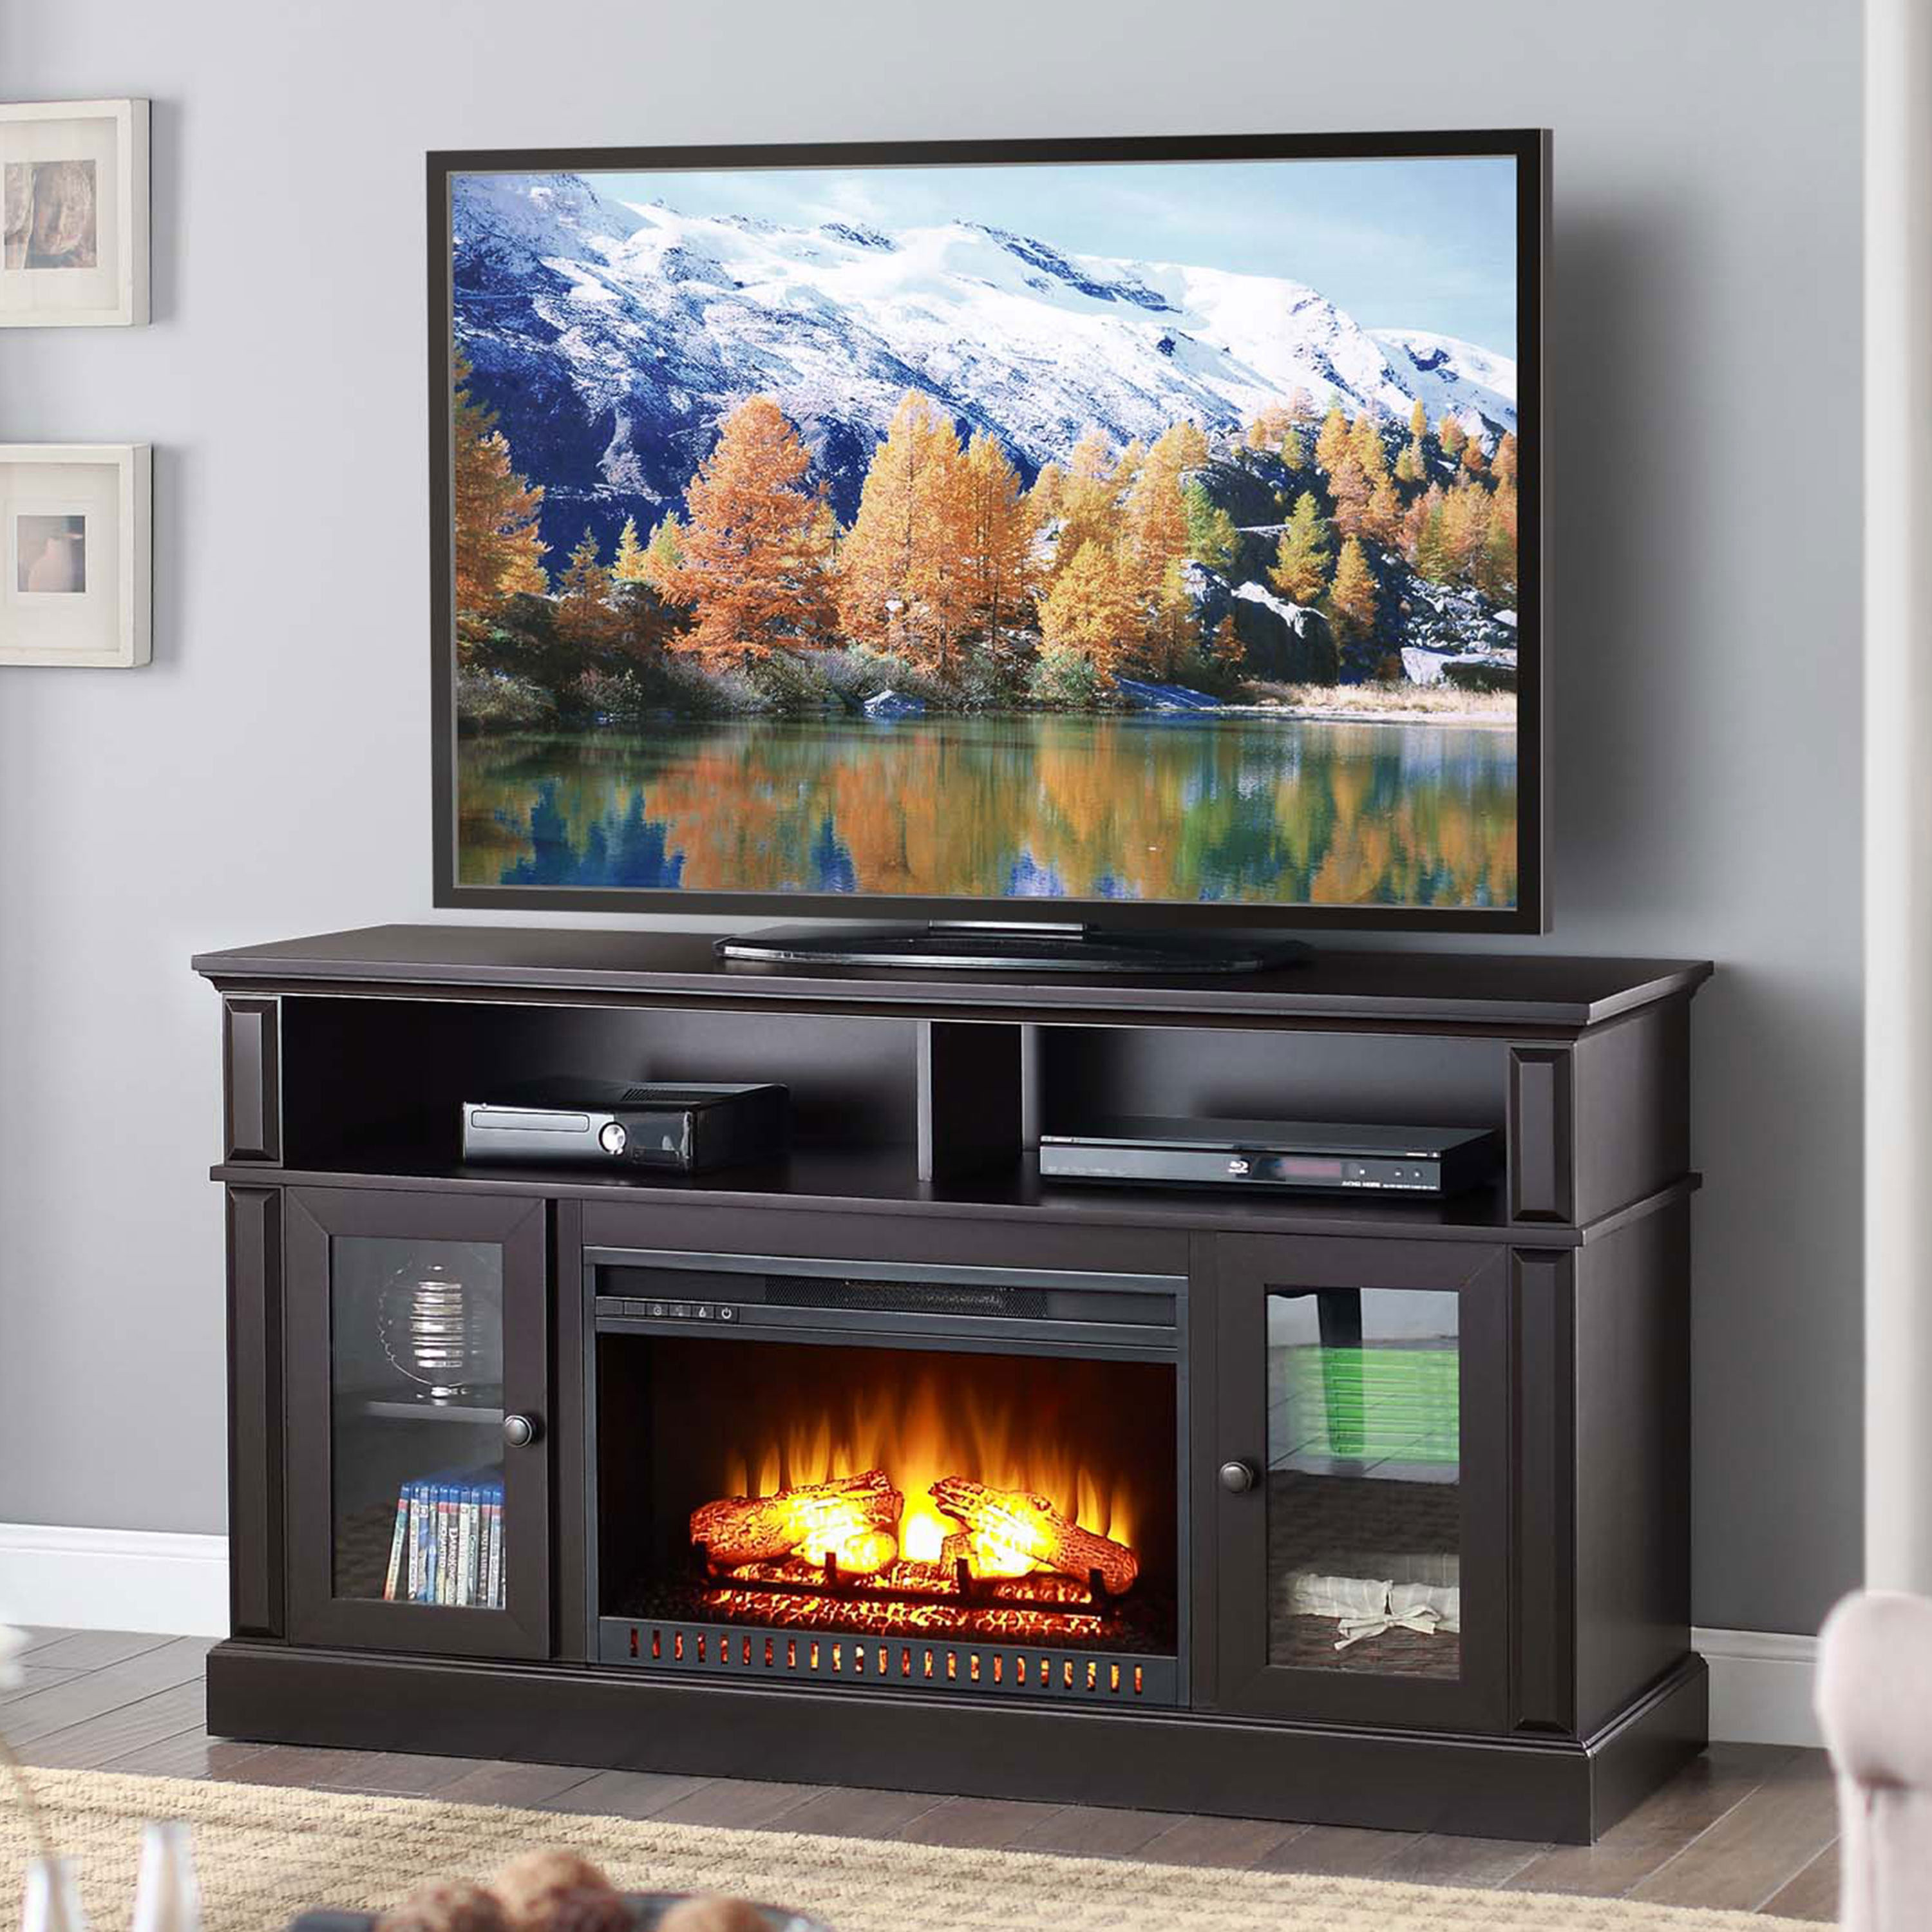 Solid Wood Entertainment Center with Fireplace New Whalen Barston Media Fireplace for Tv S Up to 70 Multiple